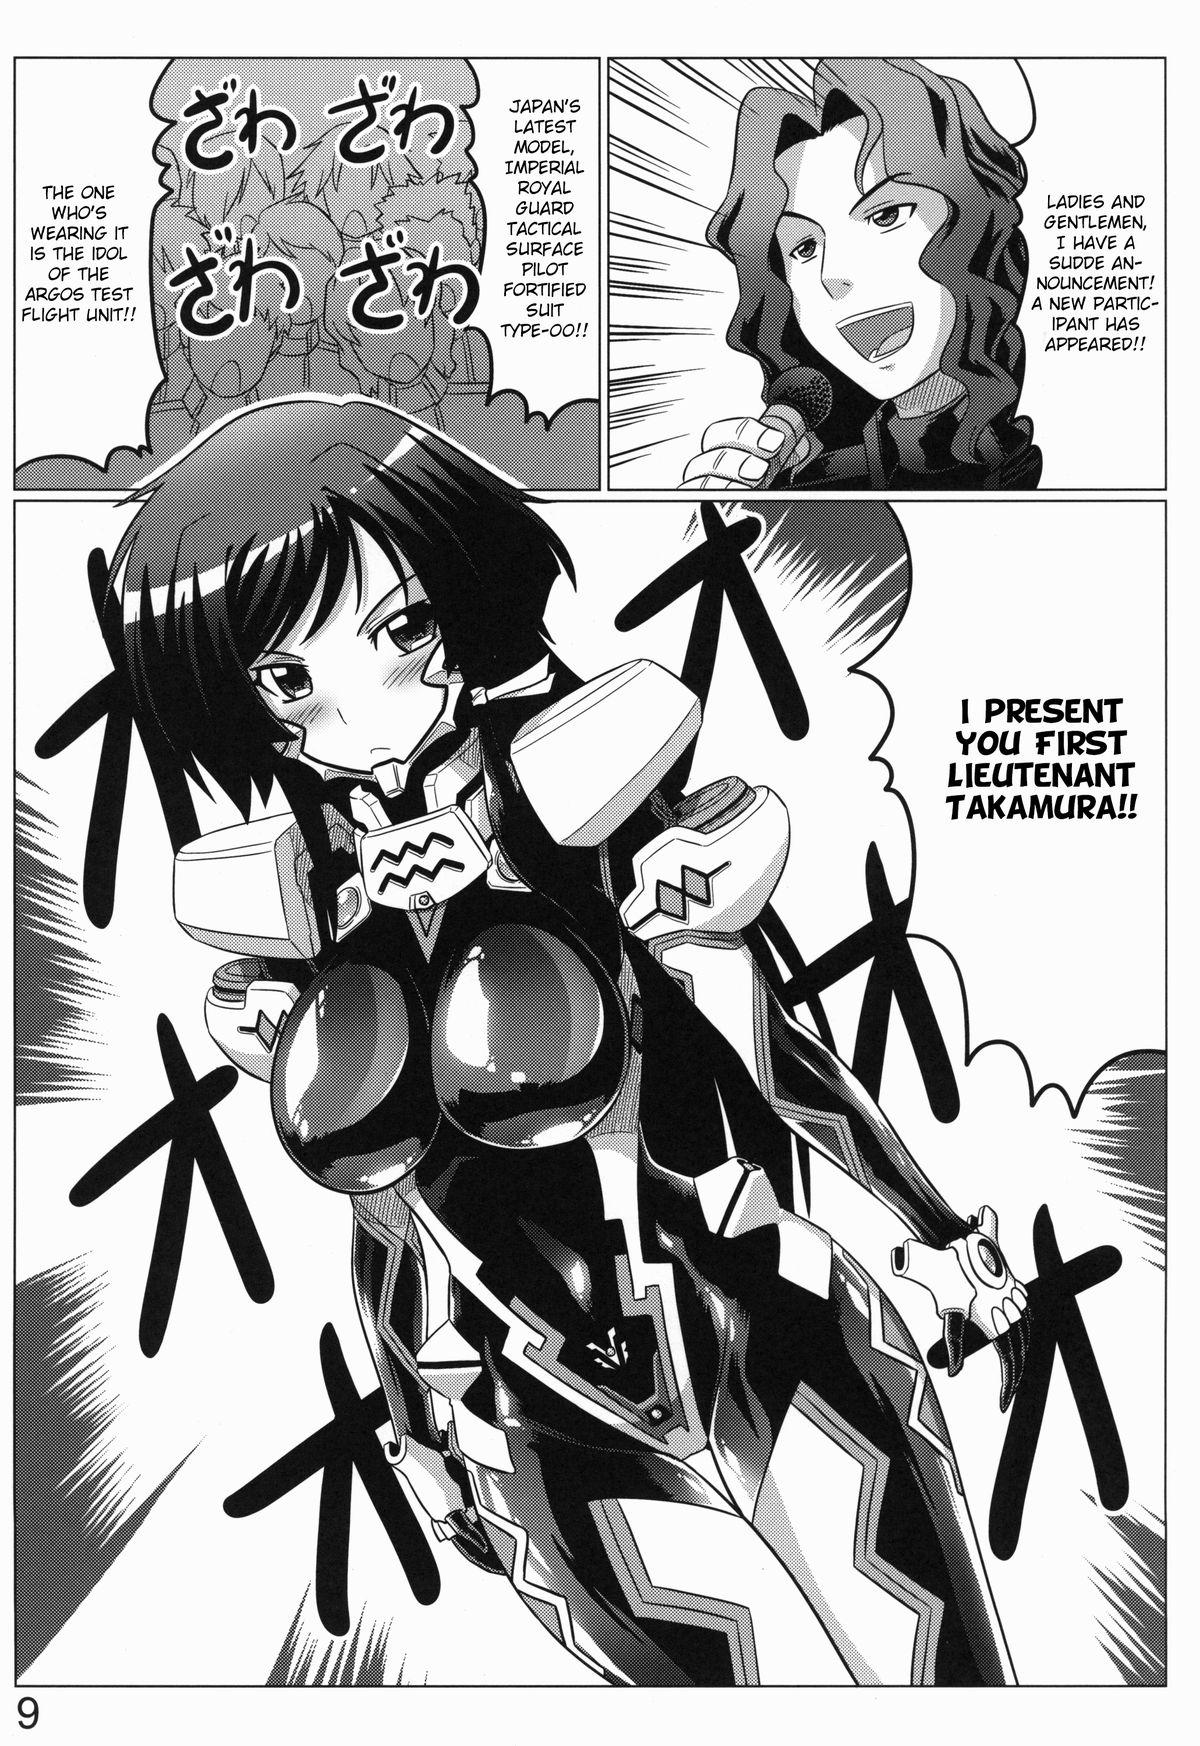 Hot Pussy 0-Shiki LOVE - Muv-luv alternative total eclipse Forbidden - Page 8